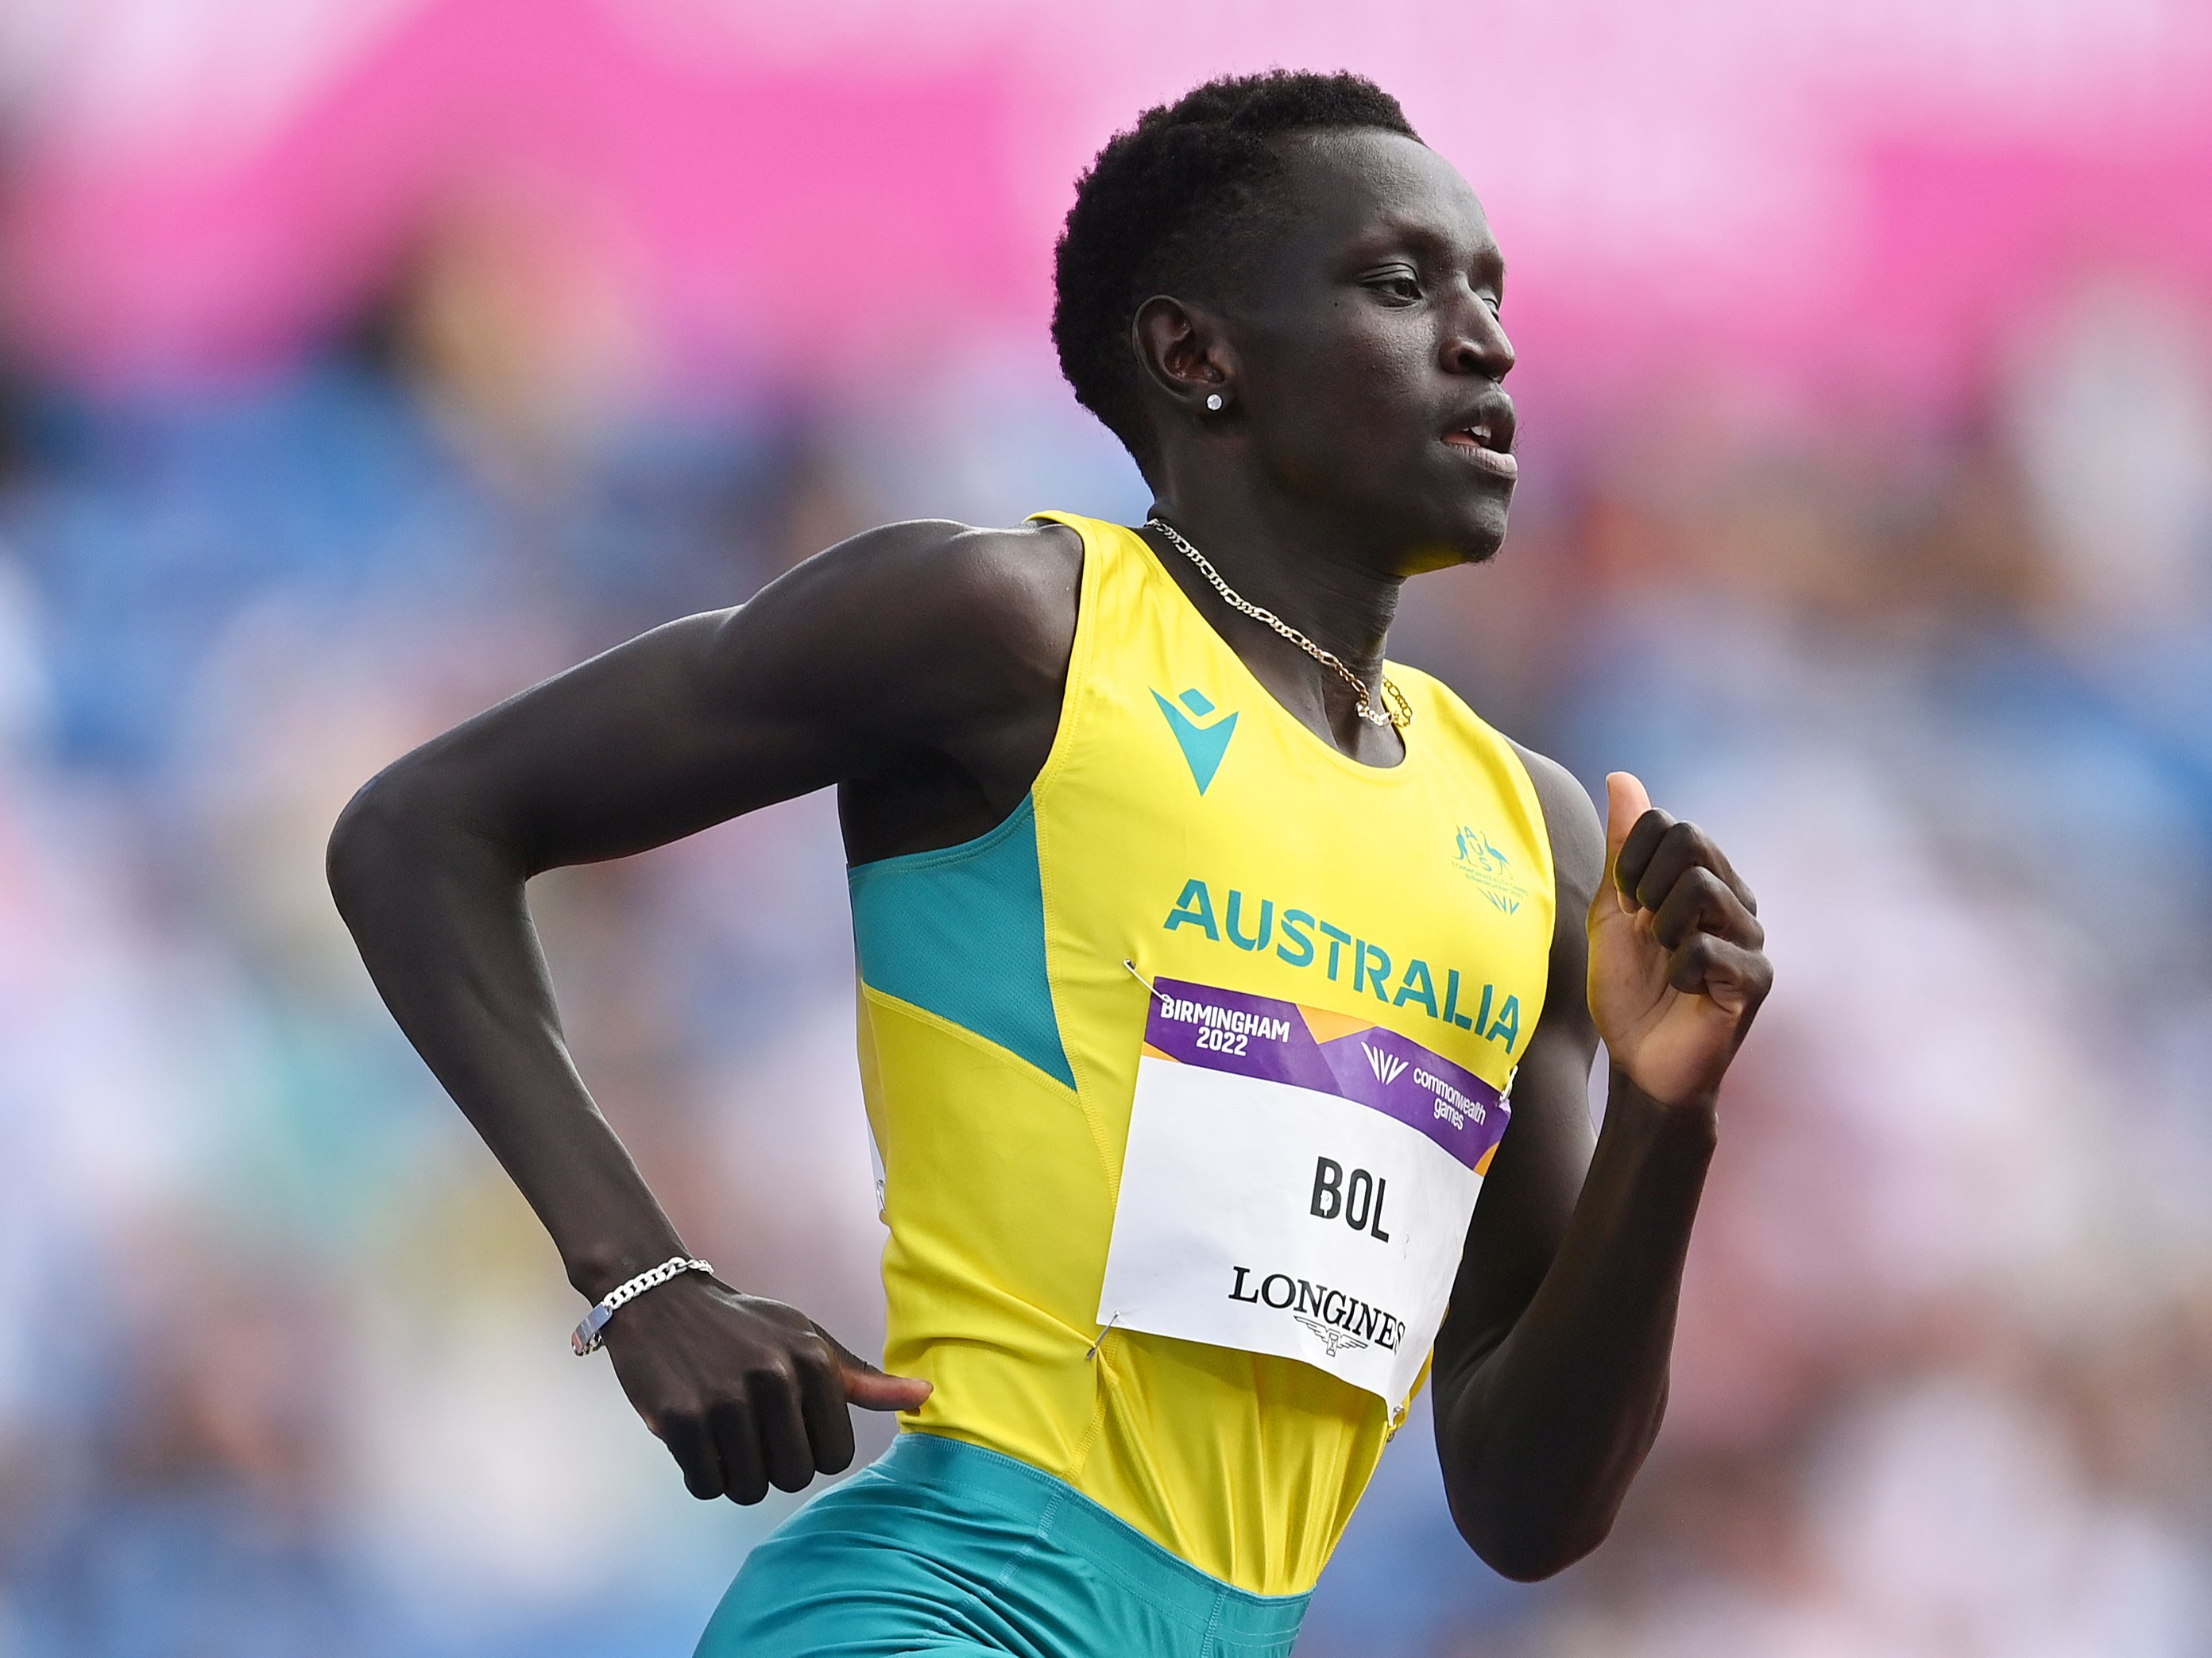 Peter Bol won silver at the Commonwealth Games last year